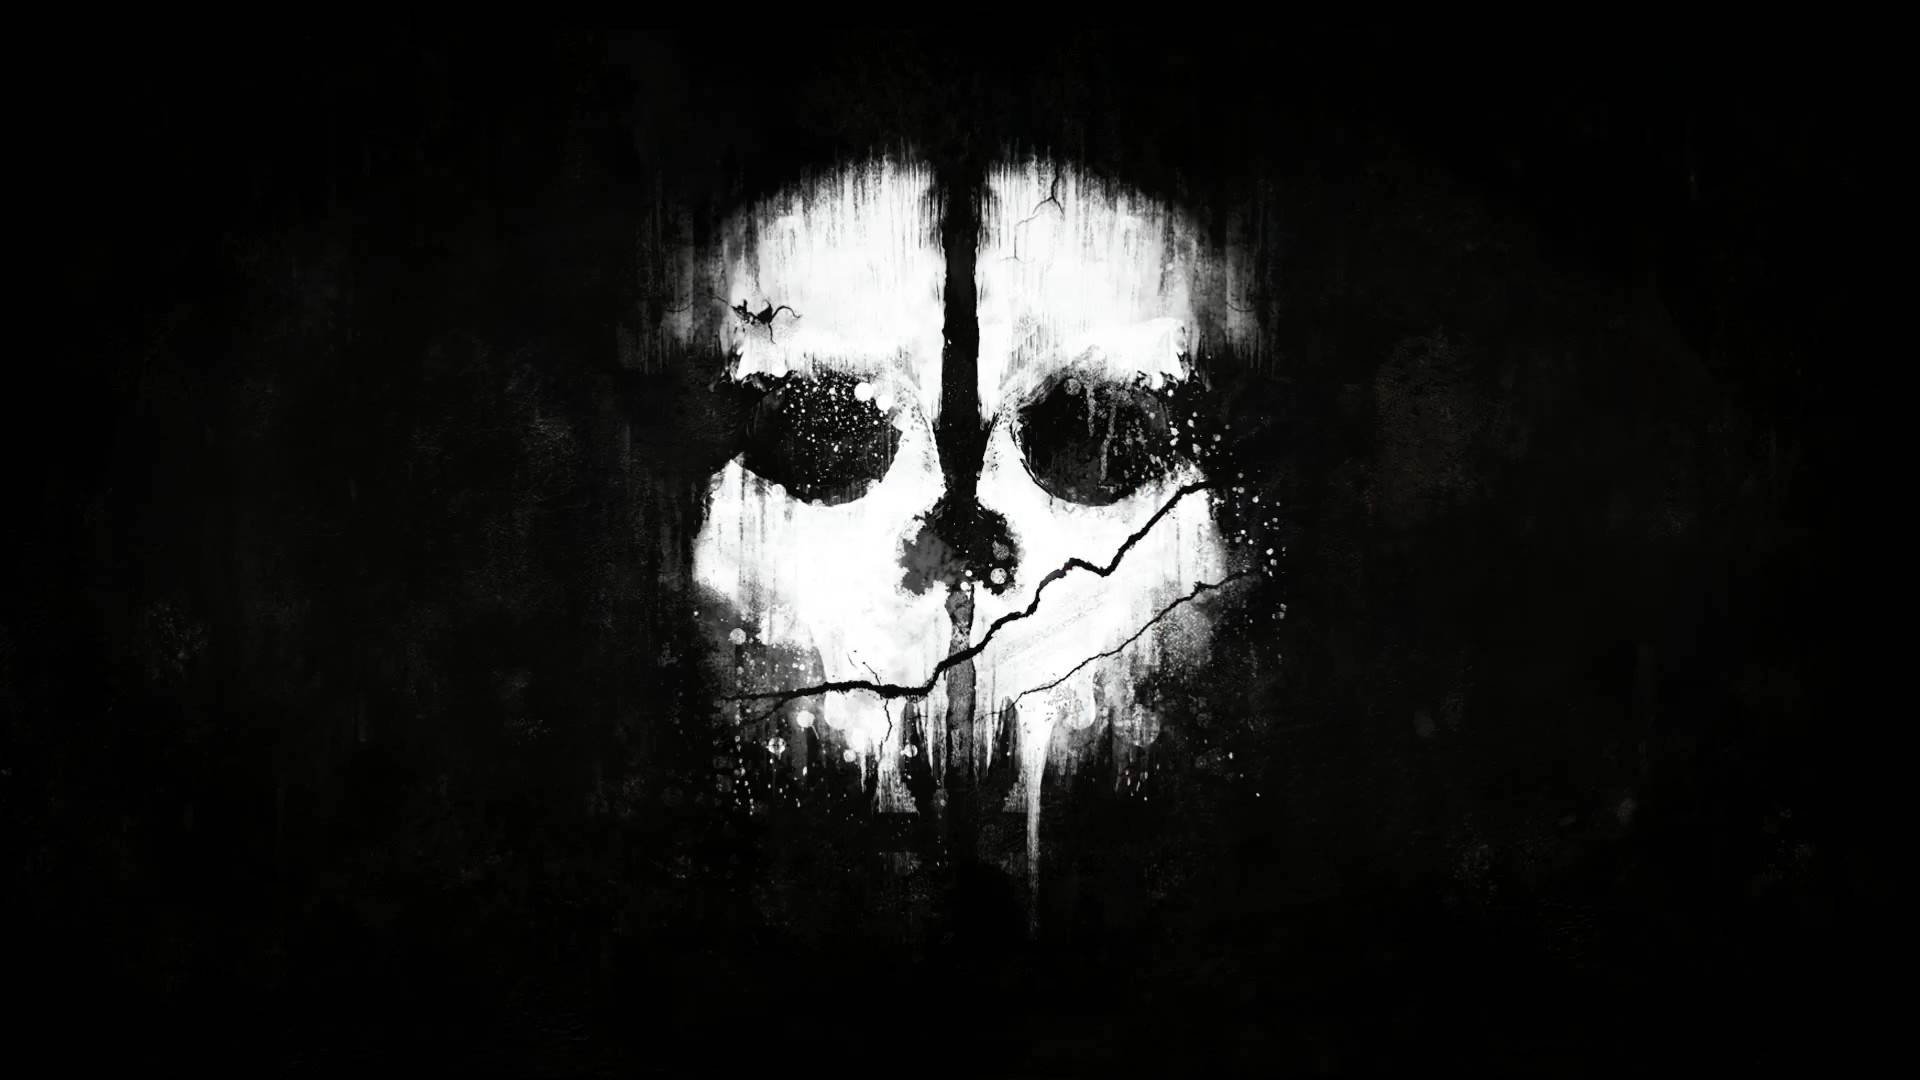 call of duty ghosts wallpaper in hd GamingBoltcom Video Game News